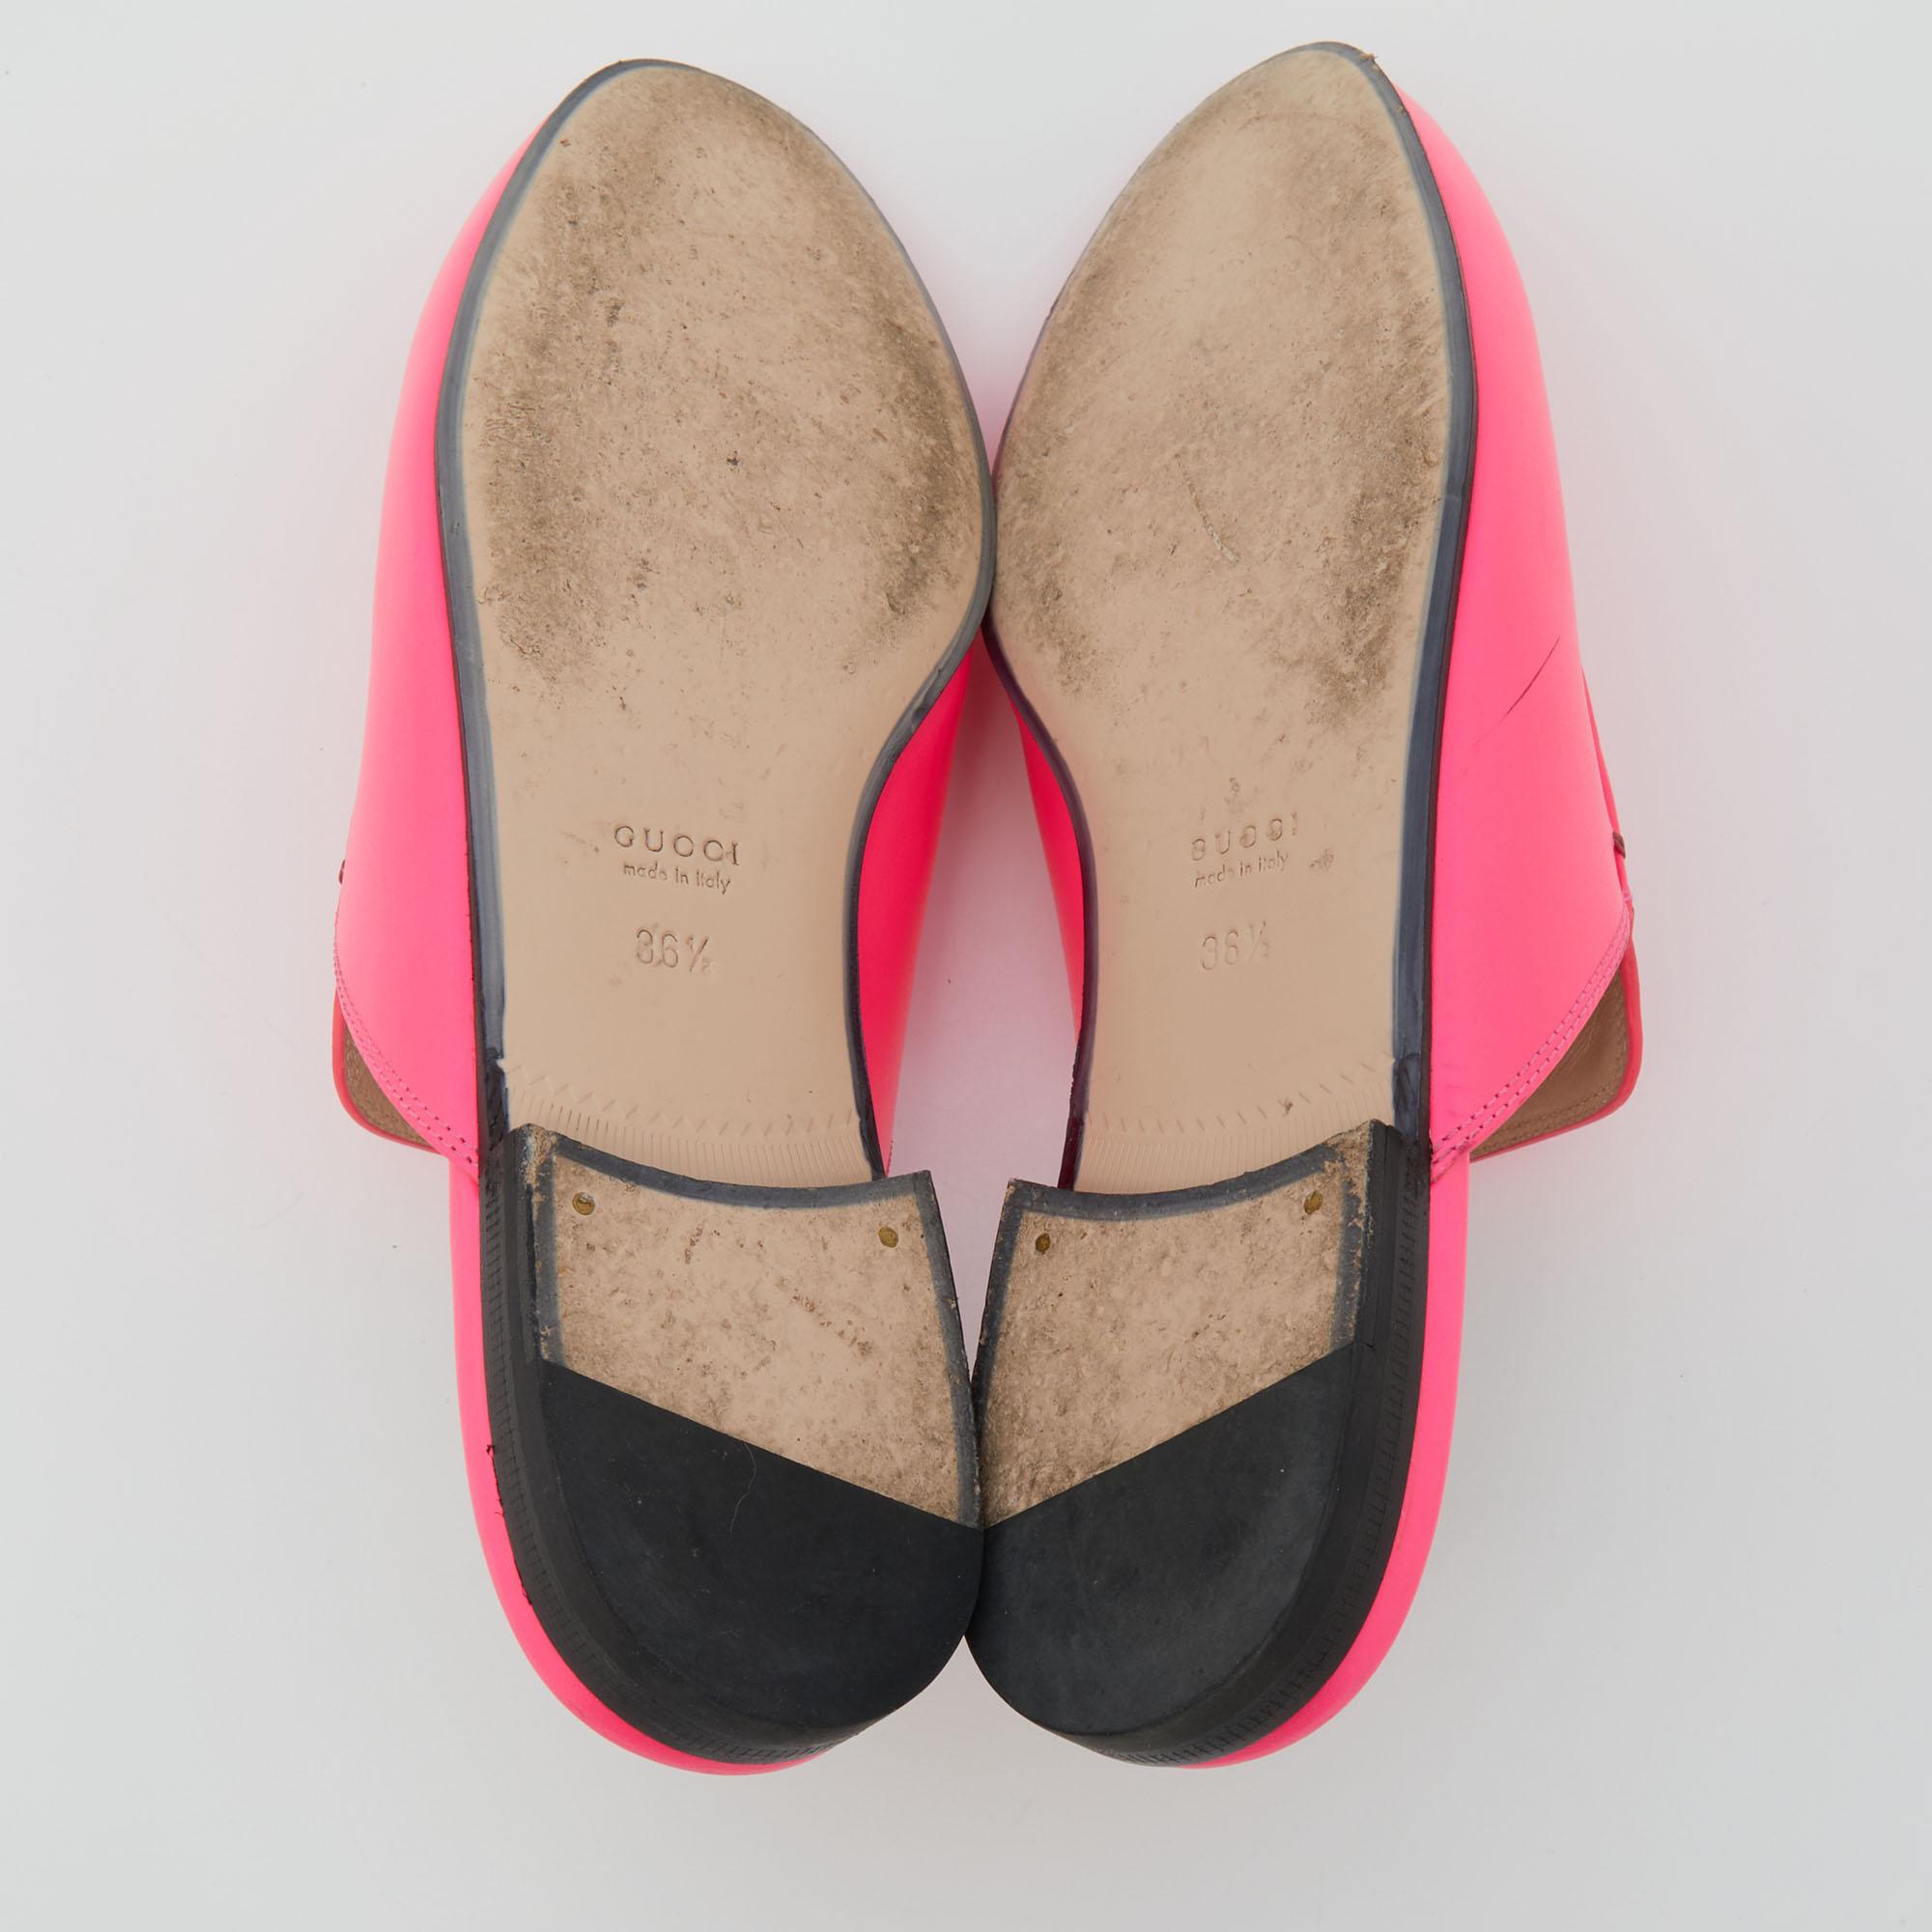 Gucci Neon Pink Leather Princetown Horsebit Flat Mules Size 36.5 1